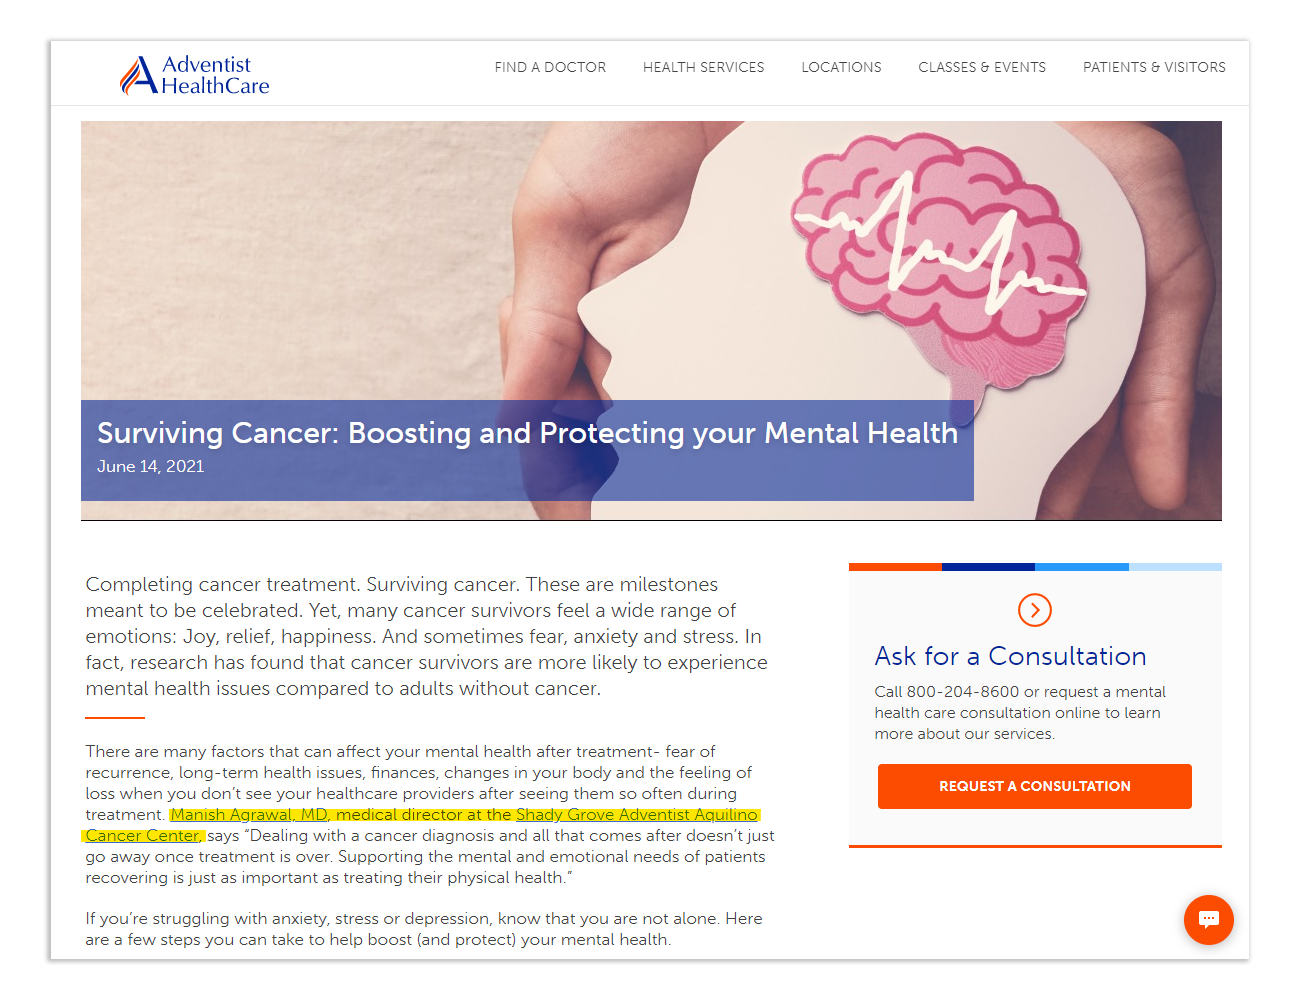 screenshot of Adventist HealthCare's Surviving Cancer Page